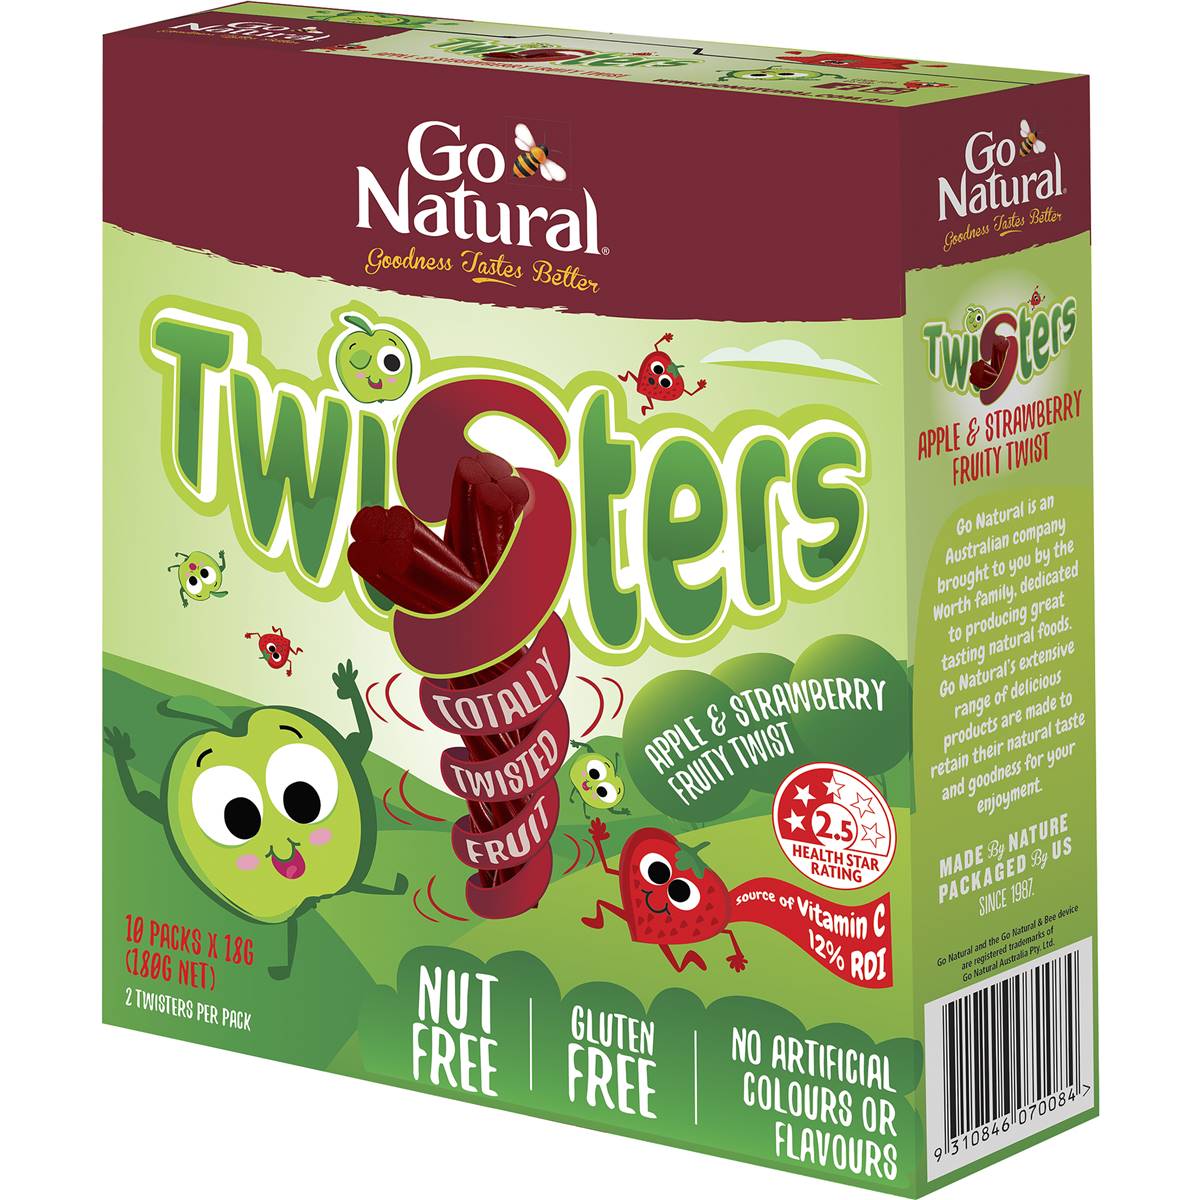 Calories in Go Natural Twisters Snacks Strawberry & Apple